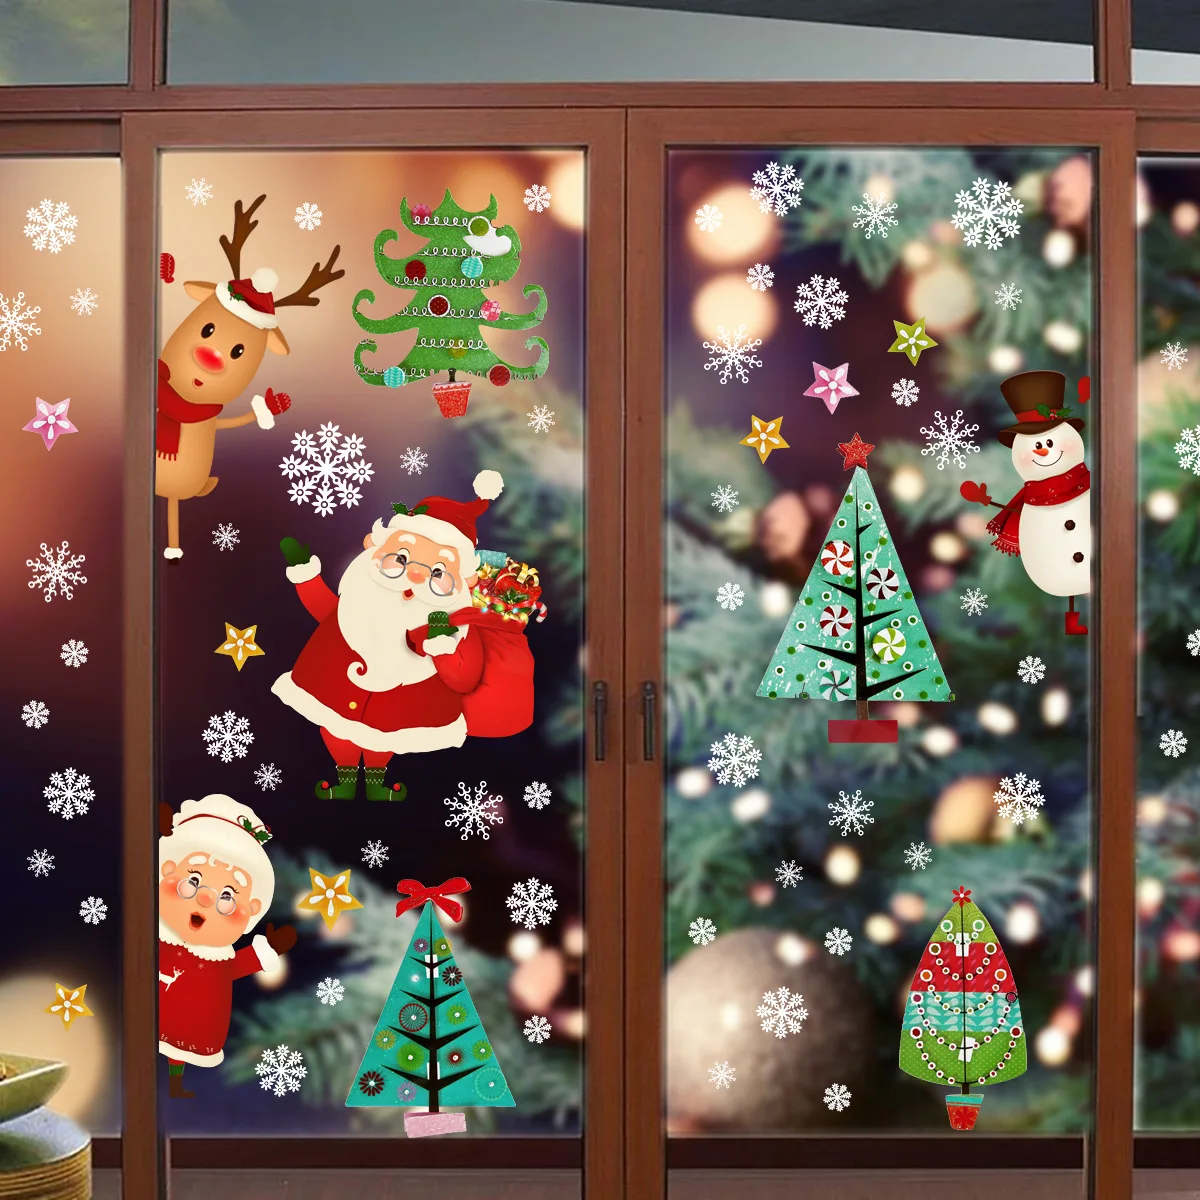 4pcs Santa Claus Snowflake Wall Sticker Christmas Electrostatic Sticker Window Glass Double-sided Decorative Funny Wall Sticker magic window glass cleaning brush double sided sponge wiper scraper bathroom wall shower squeegee mirror scrubber tools